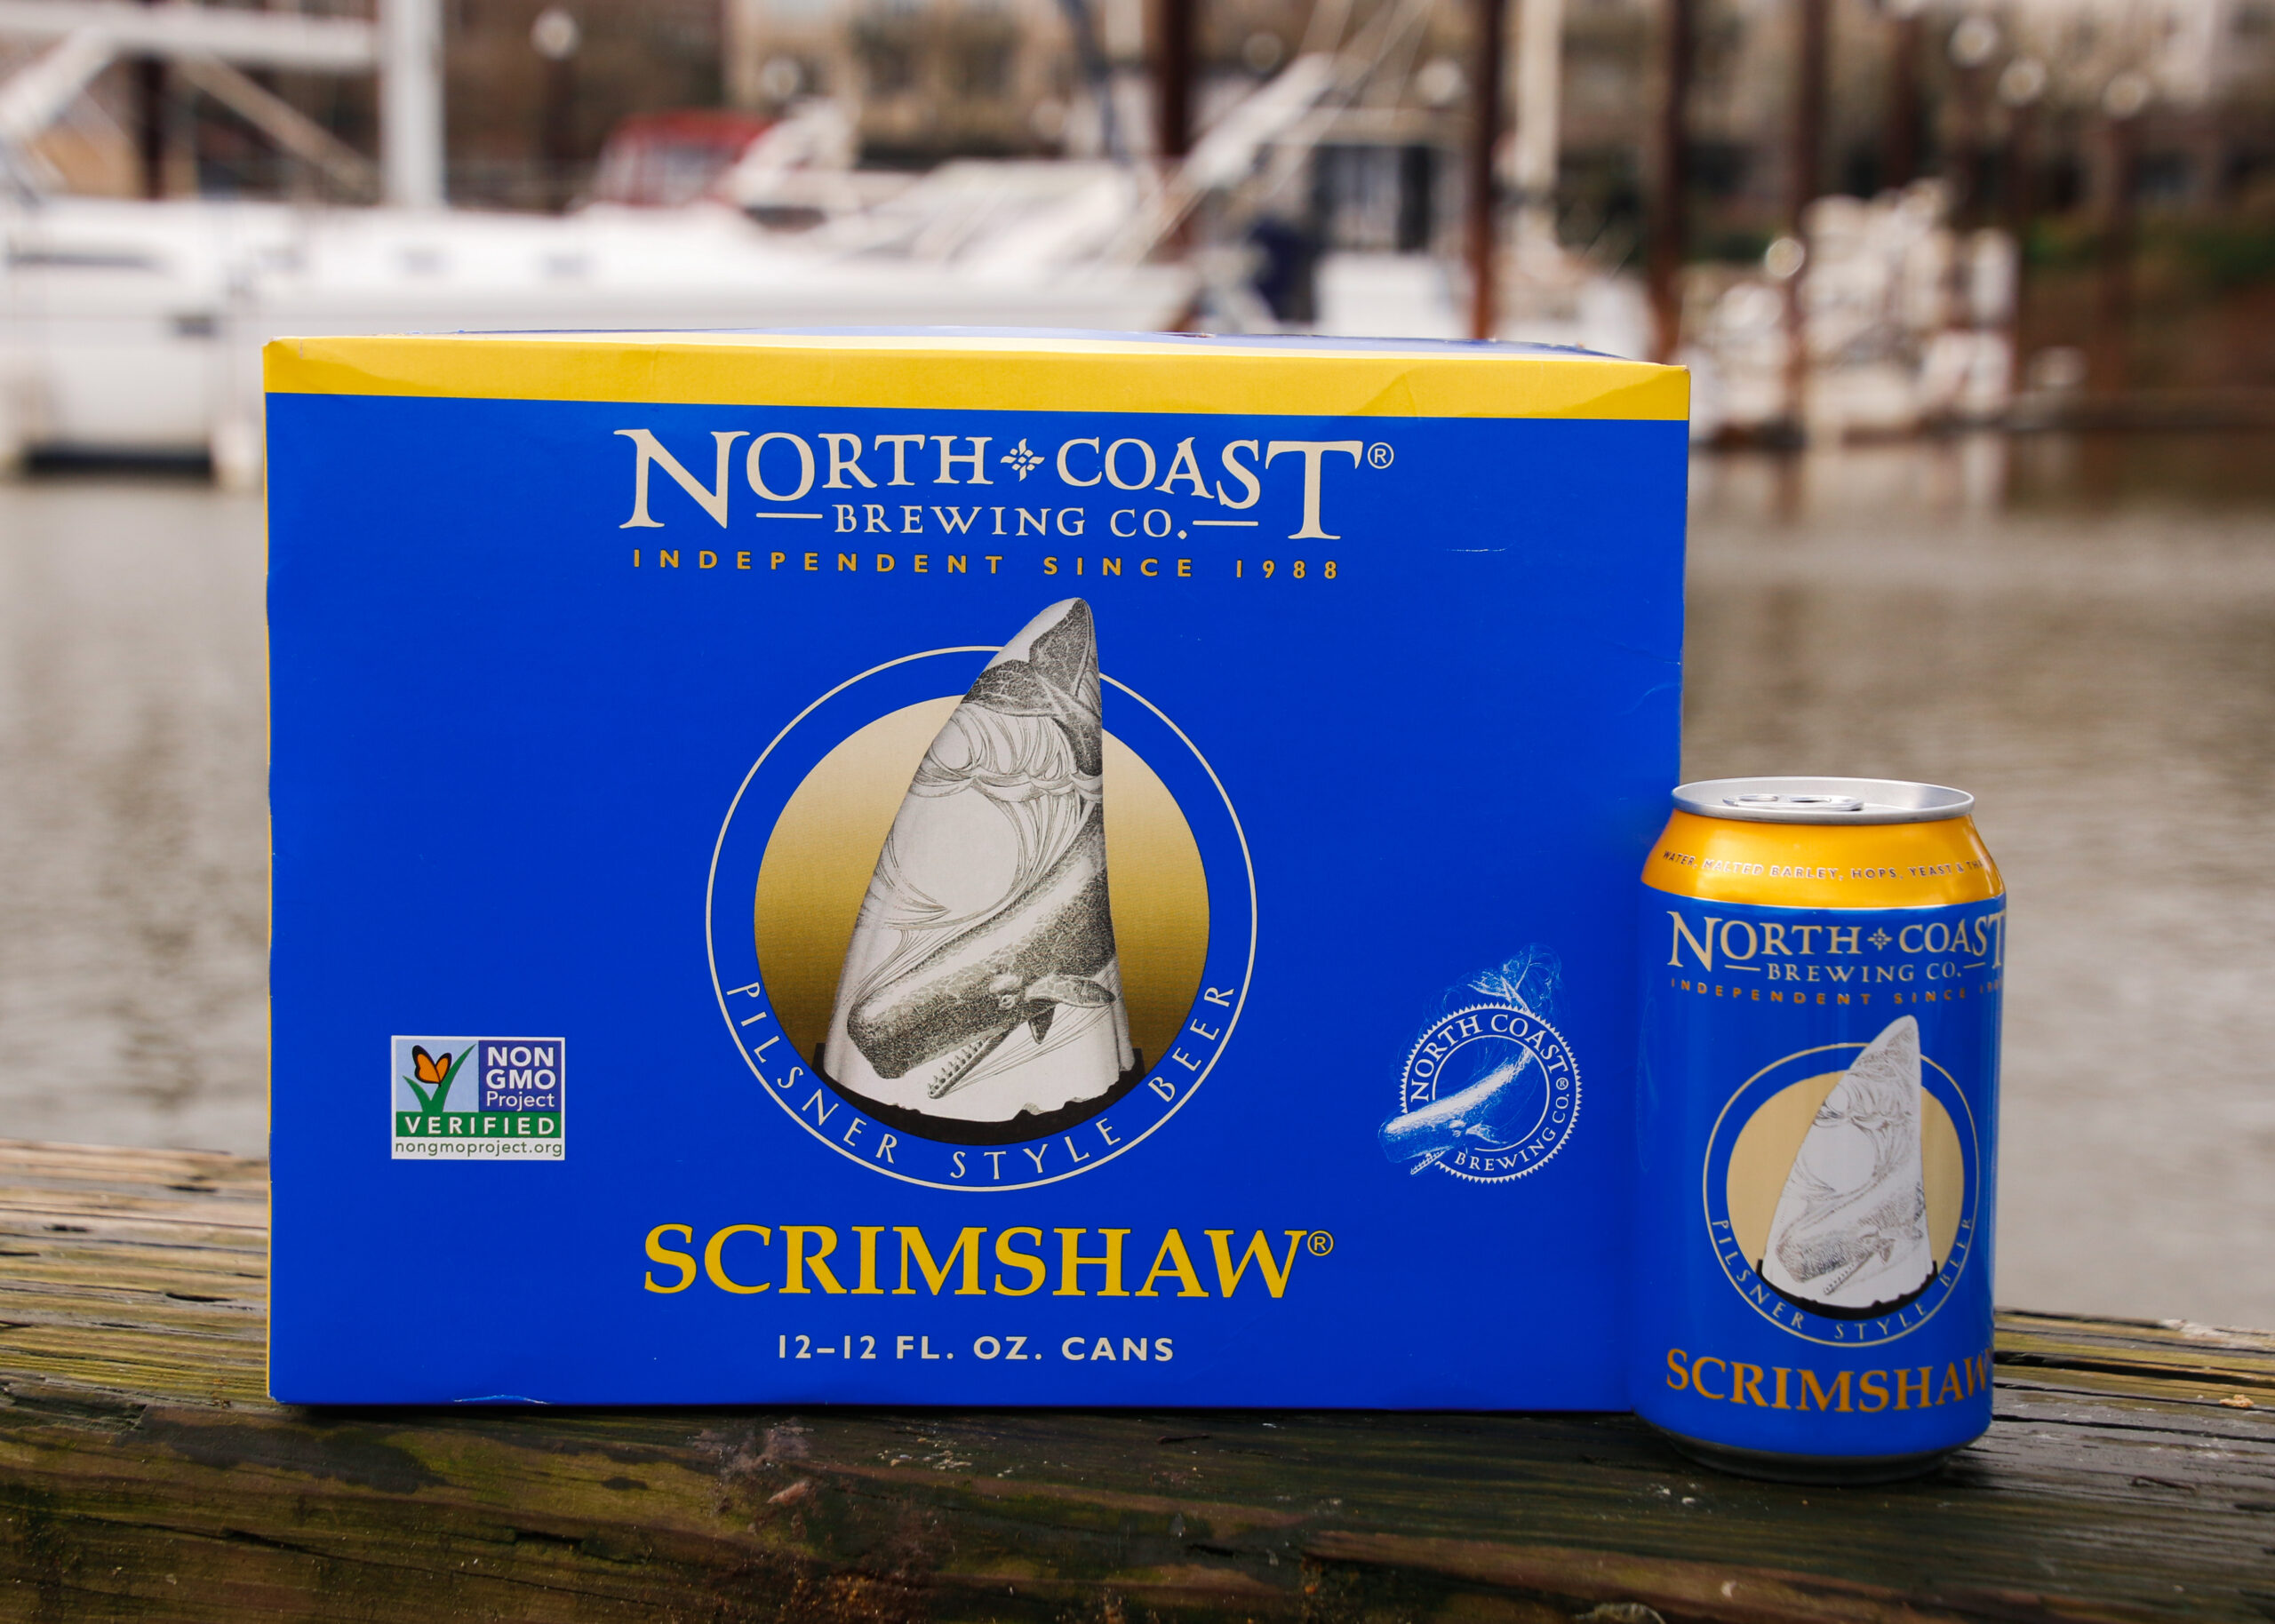 North Coast Brewing Company’s Scrimshaw Pilsner – Our First Can